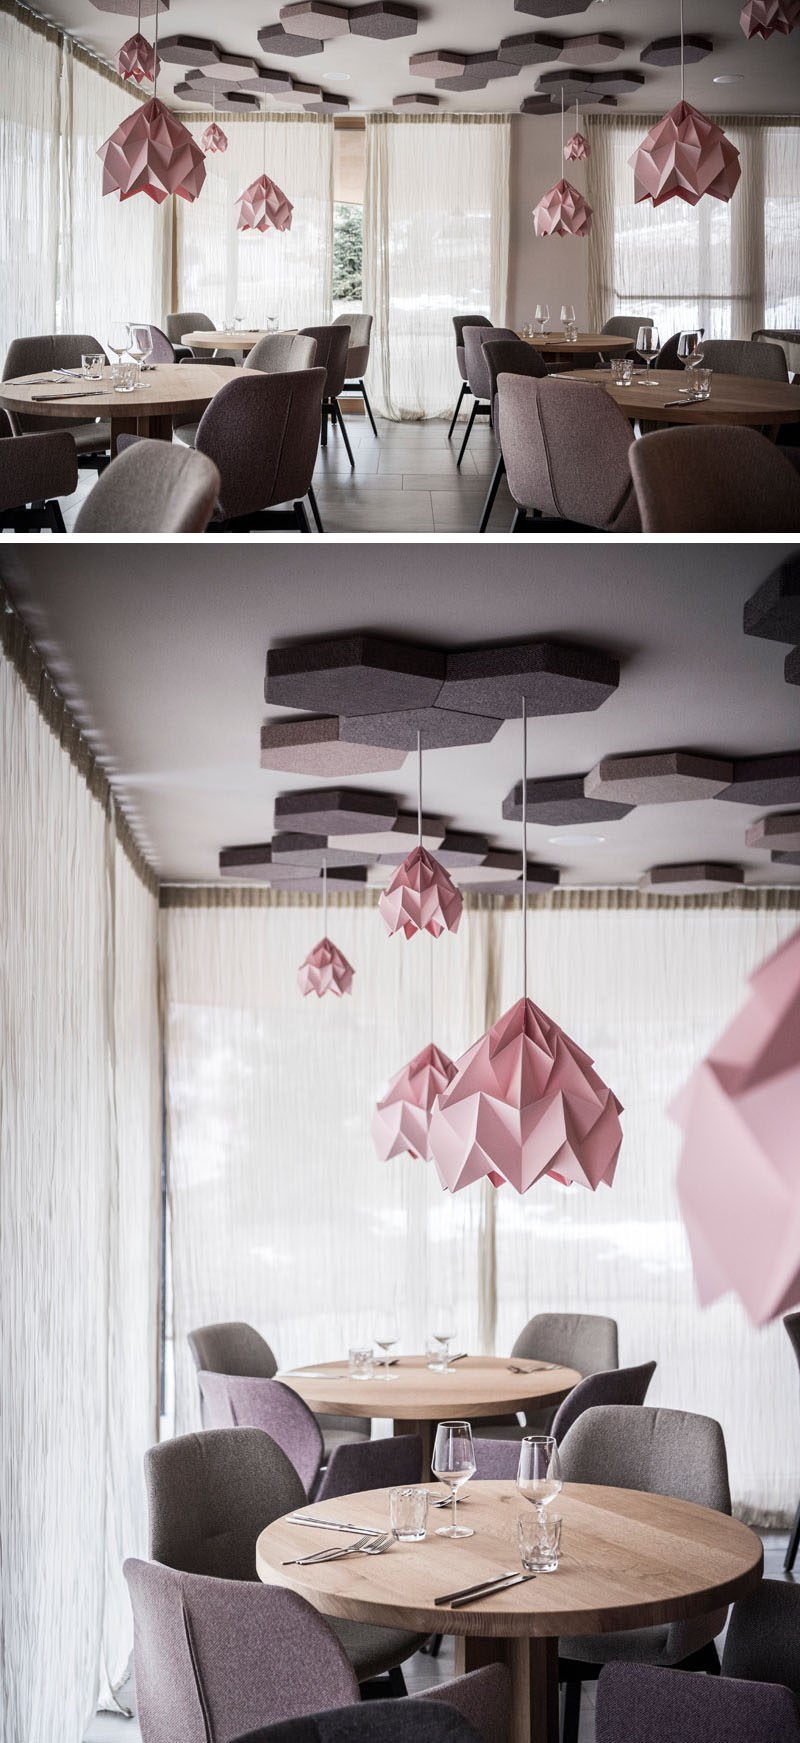 The contemporary pink light fixtures hanging from honeycomb details are the focal point in this modern hotel restaurant. Round wood tables, with dusty pink and gray wool upholstered chairs help to create a cozy atmosphere. 